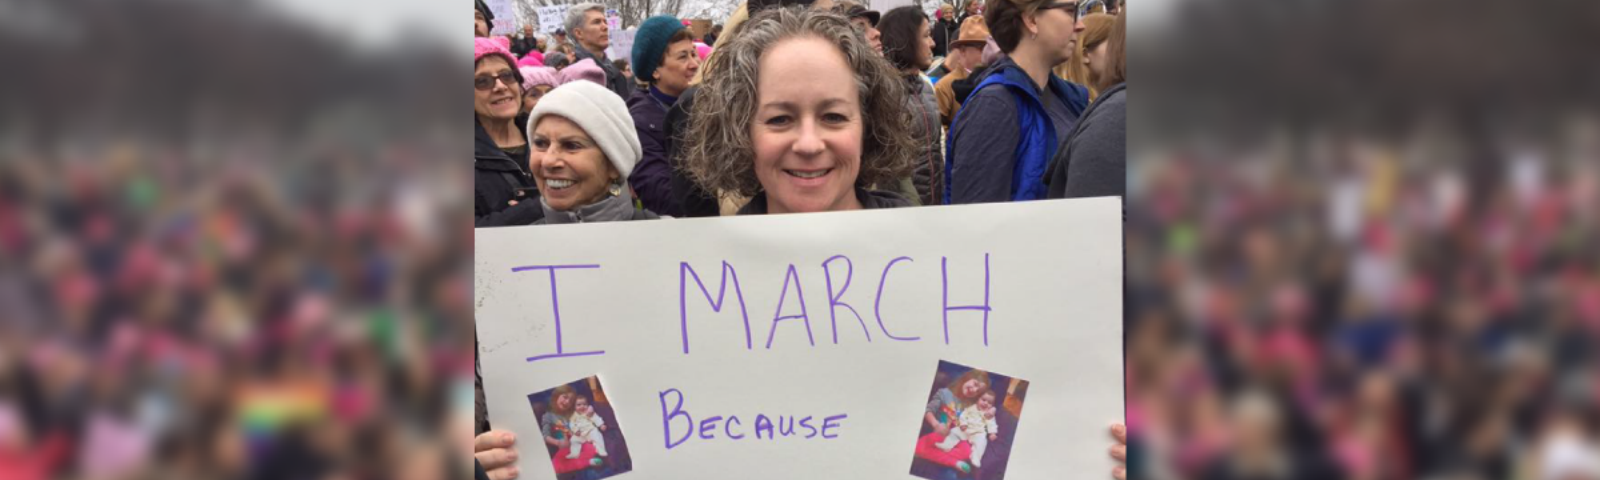 Why I March, and What To Do Next